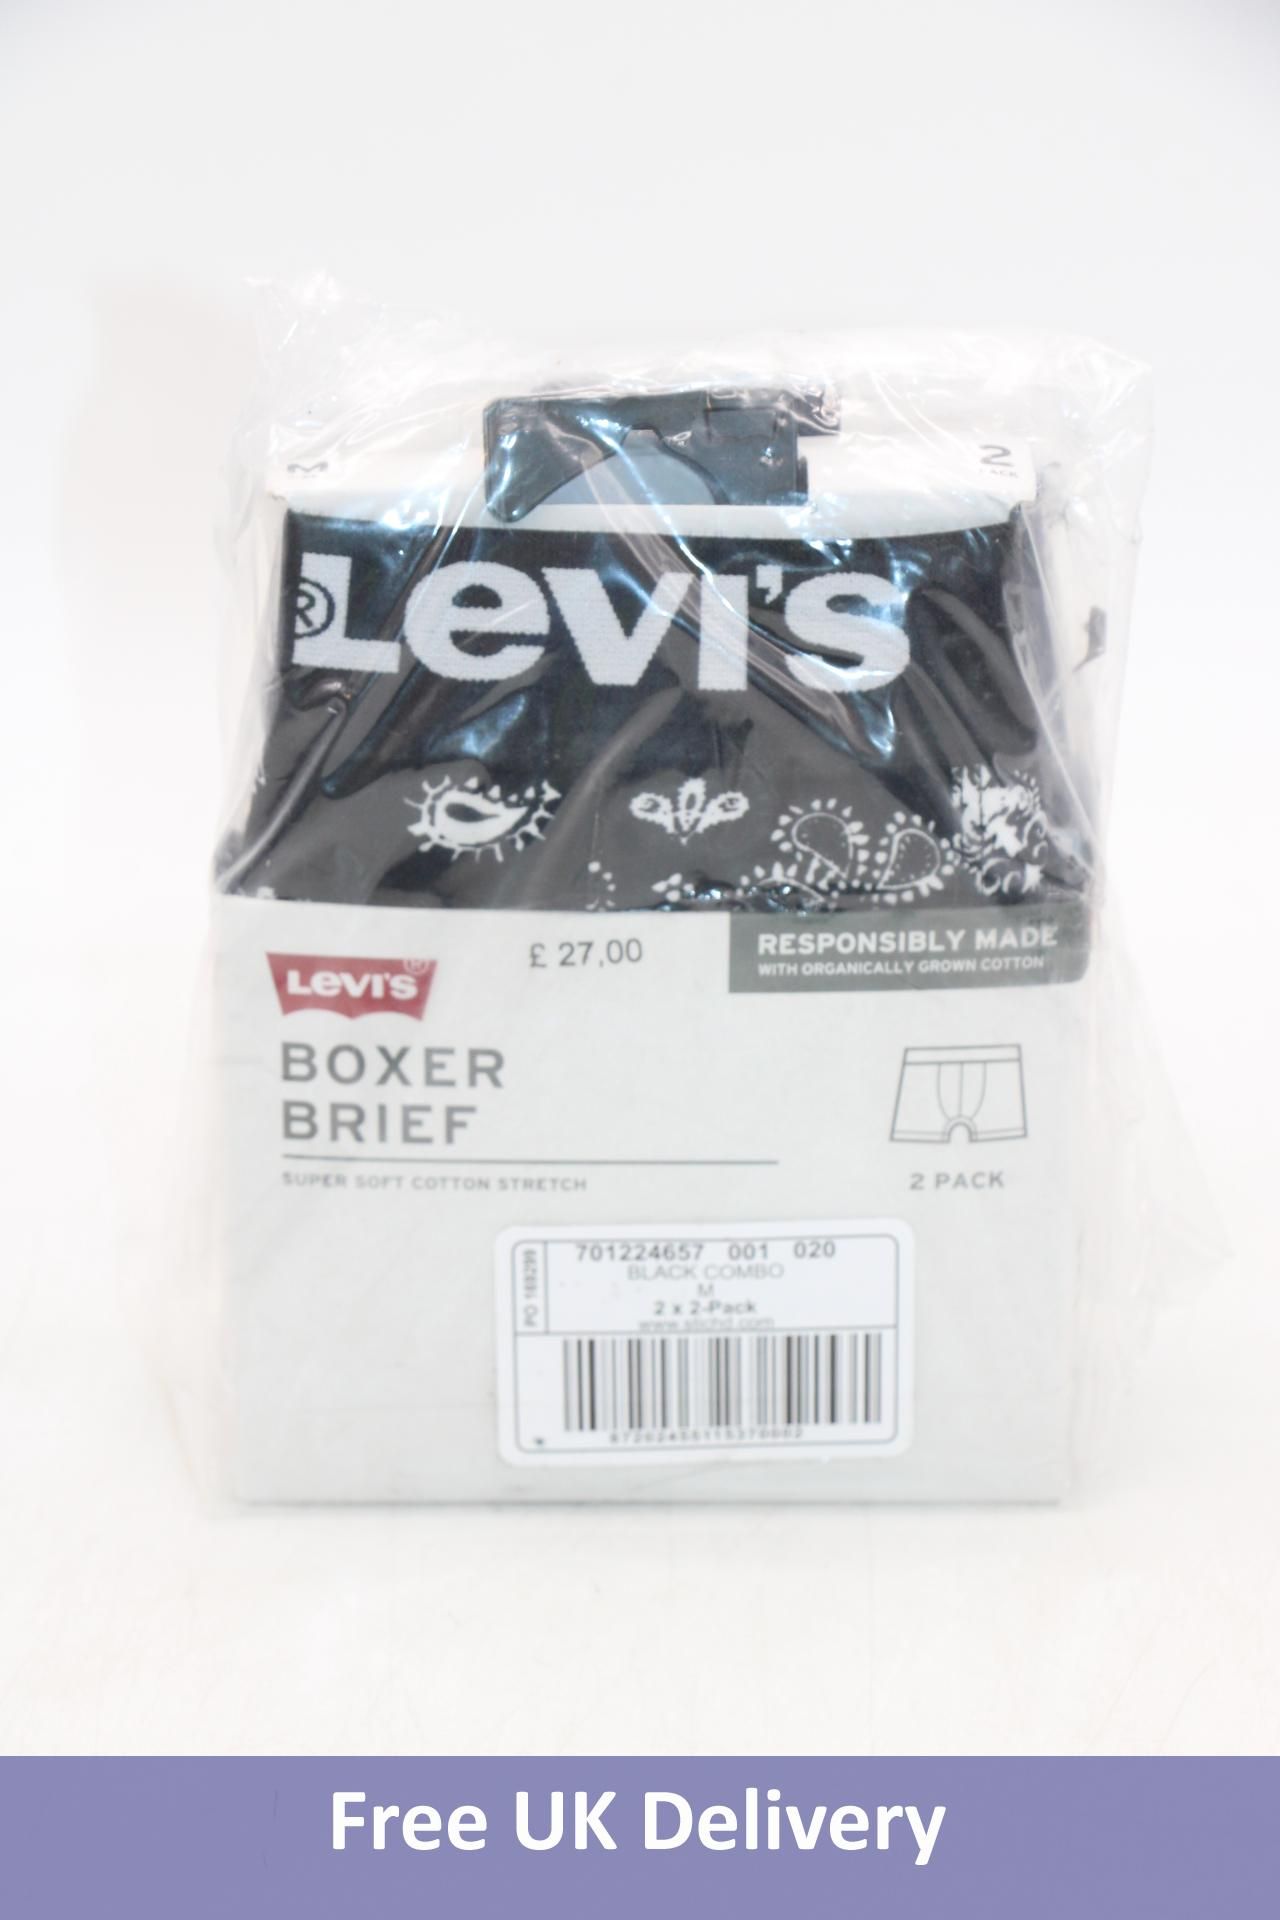 Six Packs of Levi's Boxer Brief, Black Combo, Size M, 2x per Pack